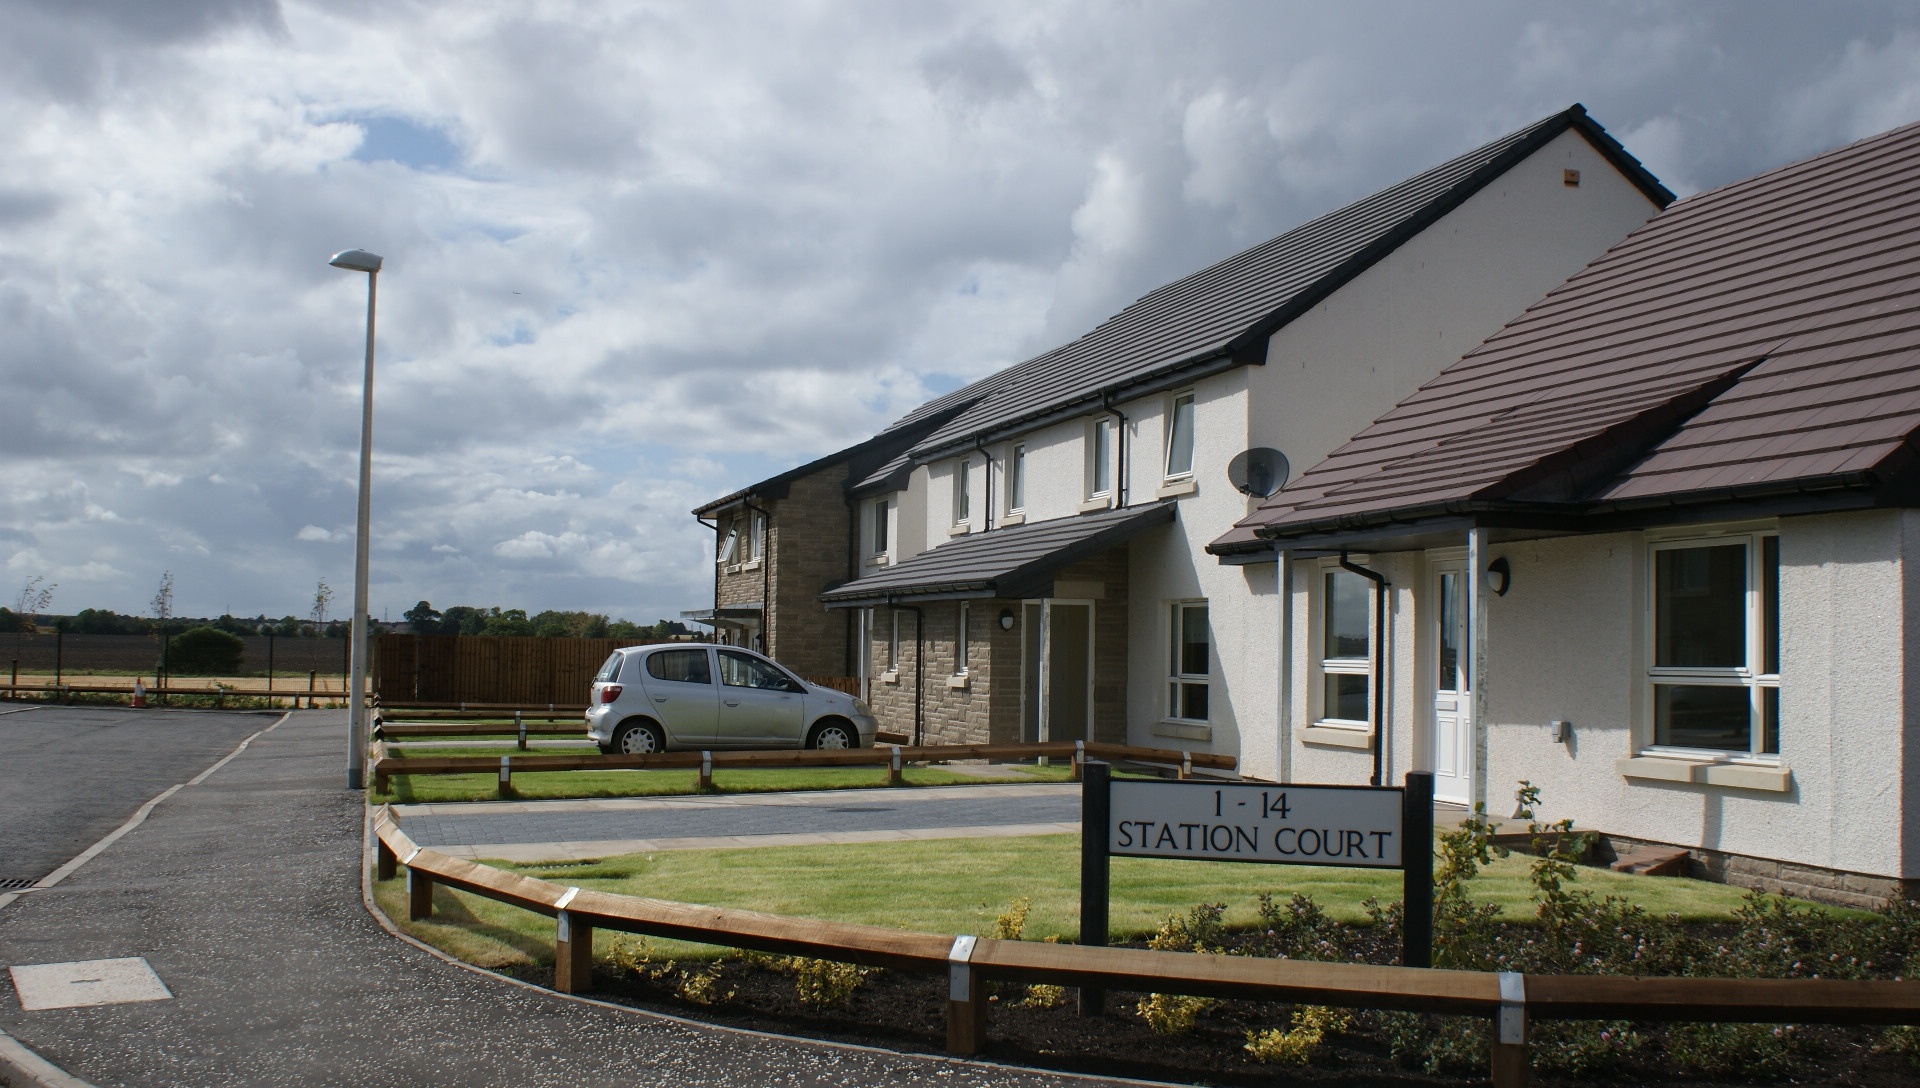 Propertymark urges Scottish Government to facilitate delivery of housing of all tenures